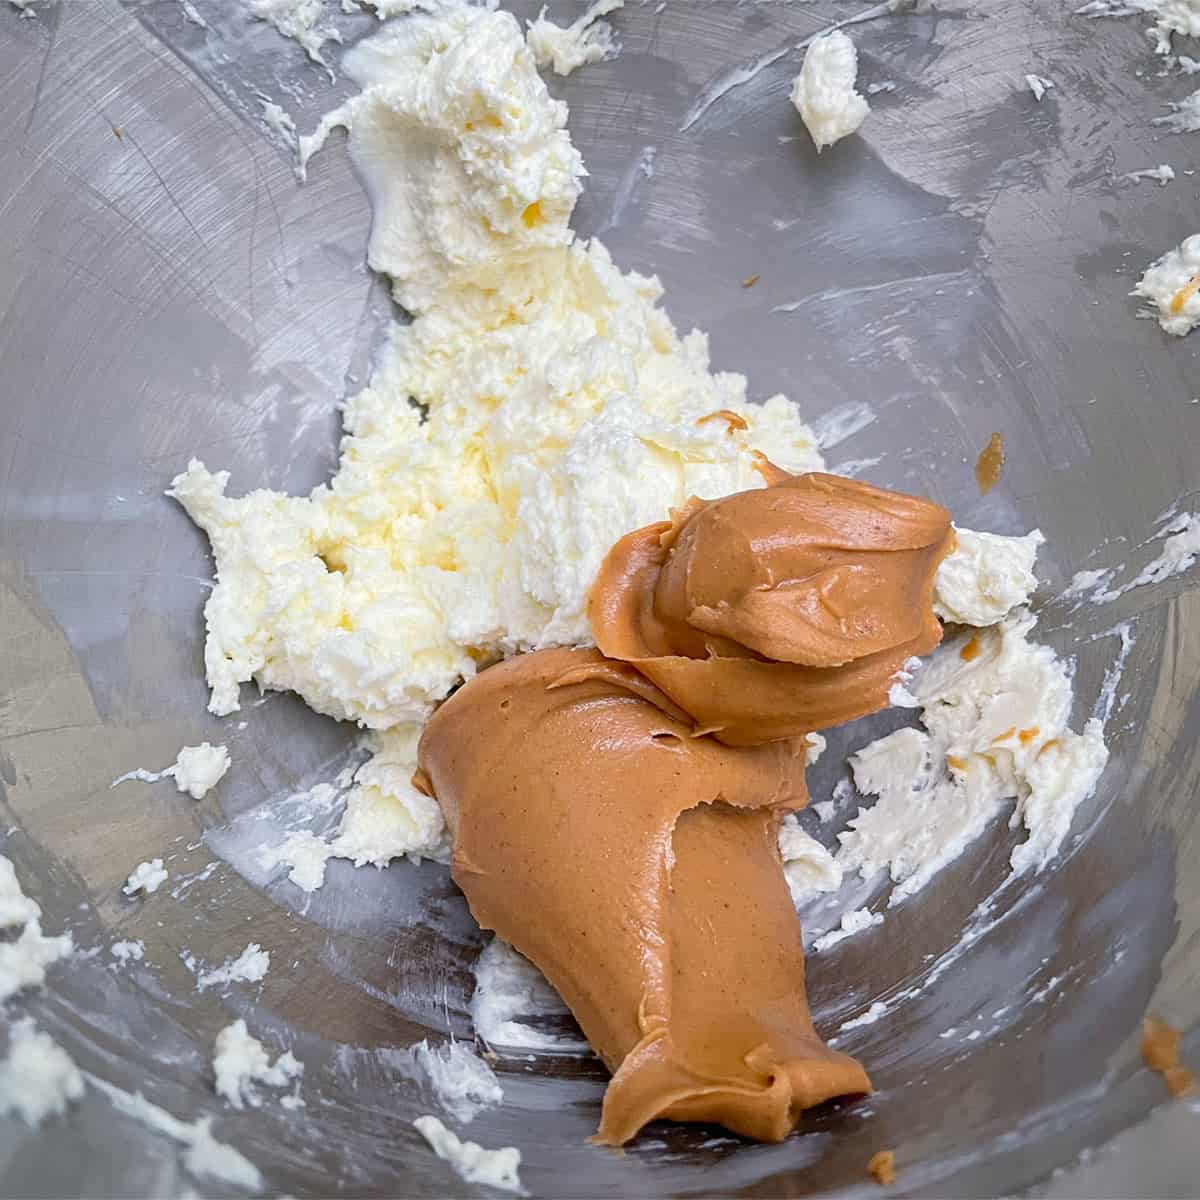 The creamy peanut butter is added to the butter cream cheese.